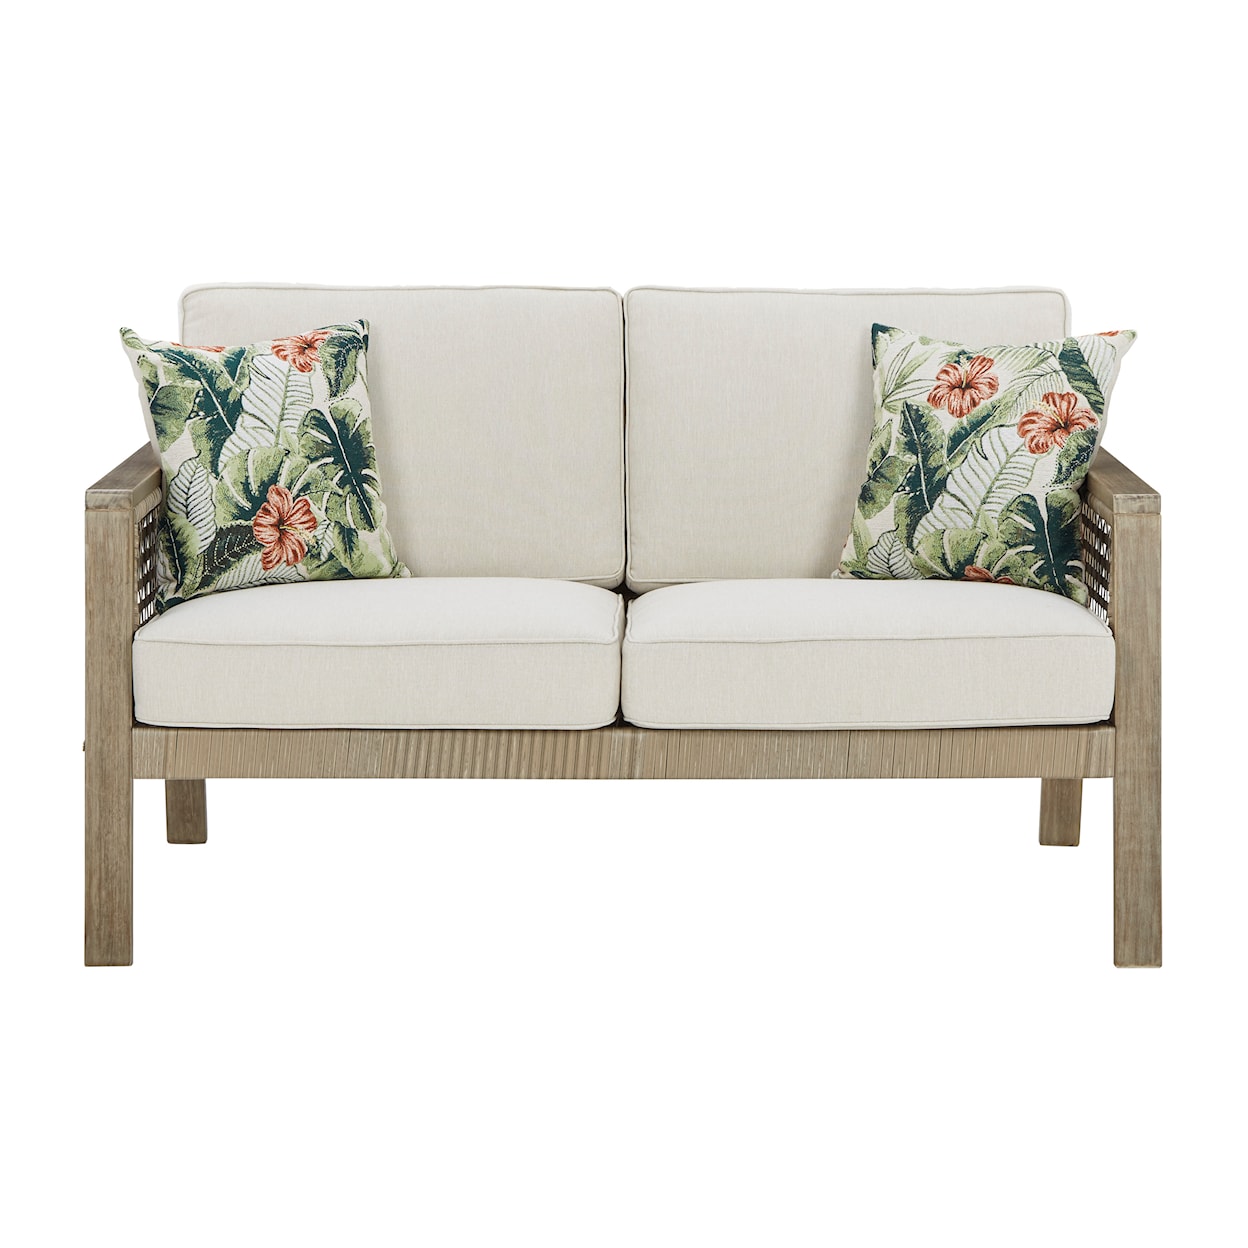 Signature Design by Ashley Barn Cove Loveseat with Cushion